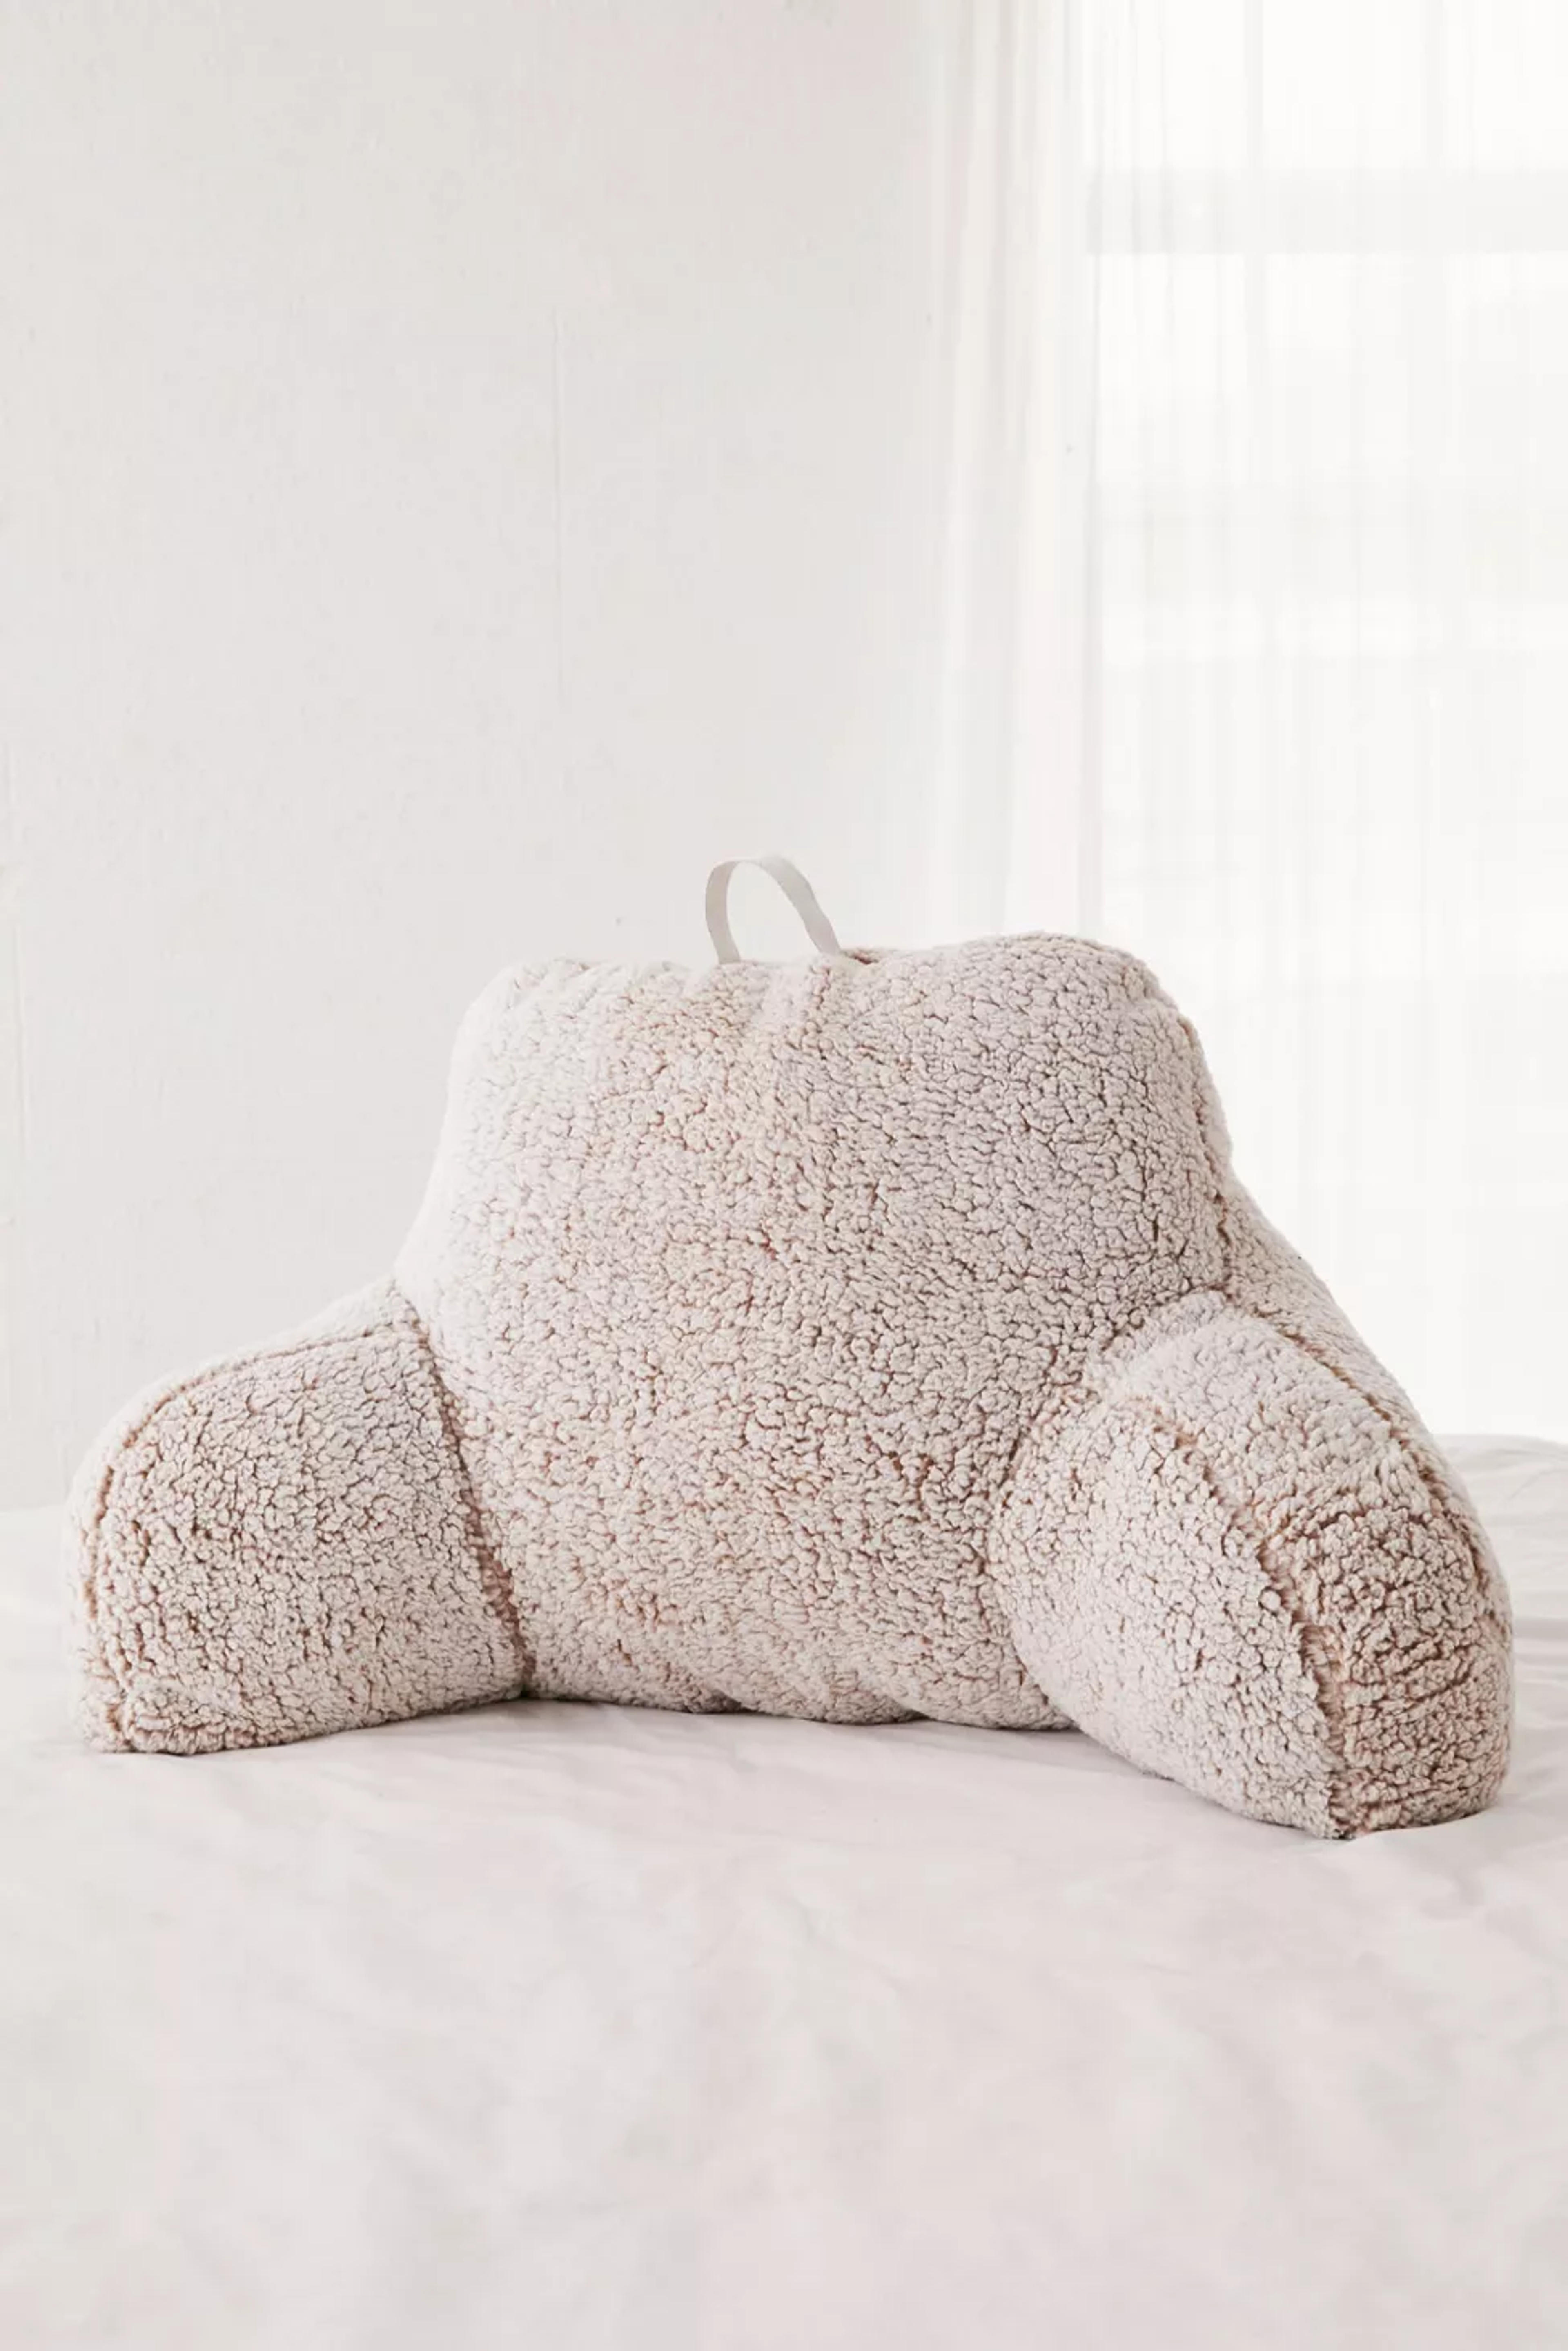 Amped Fleece Boo Pillow | Urban Outfitters